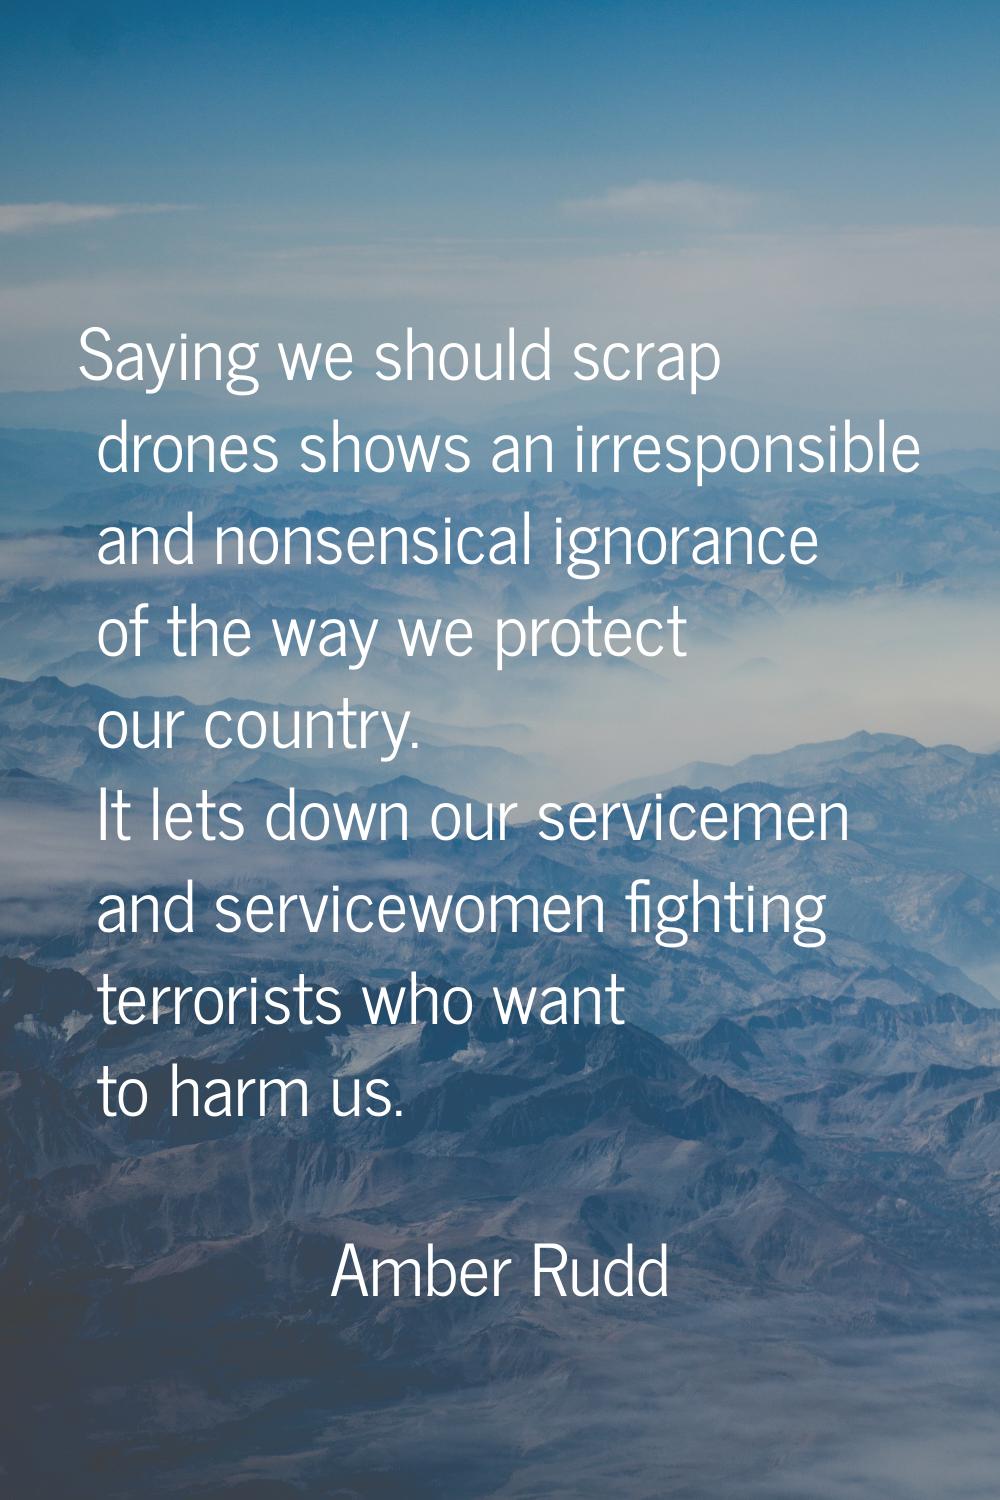 Saying we should scrap drones shows an irresponsible and nonsensical ignorance of the way we protec